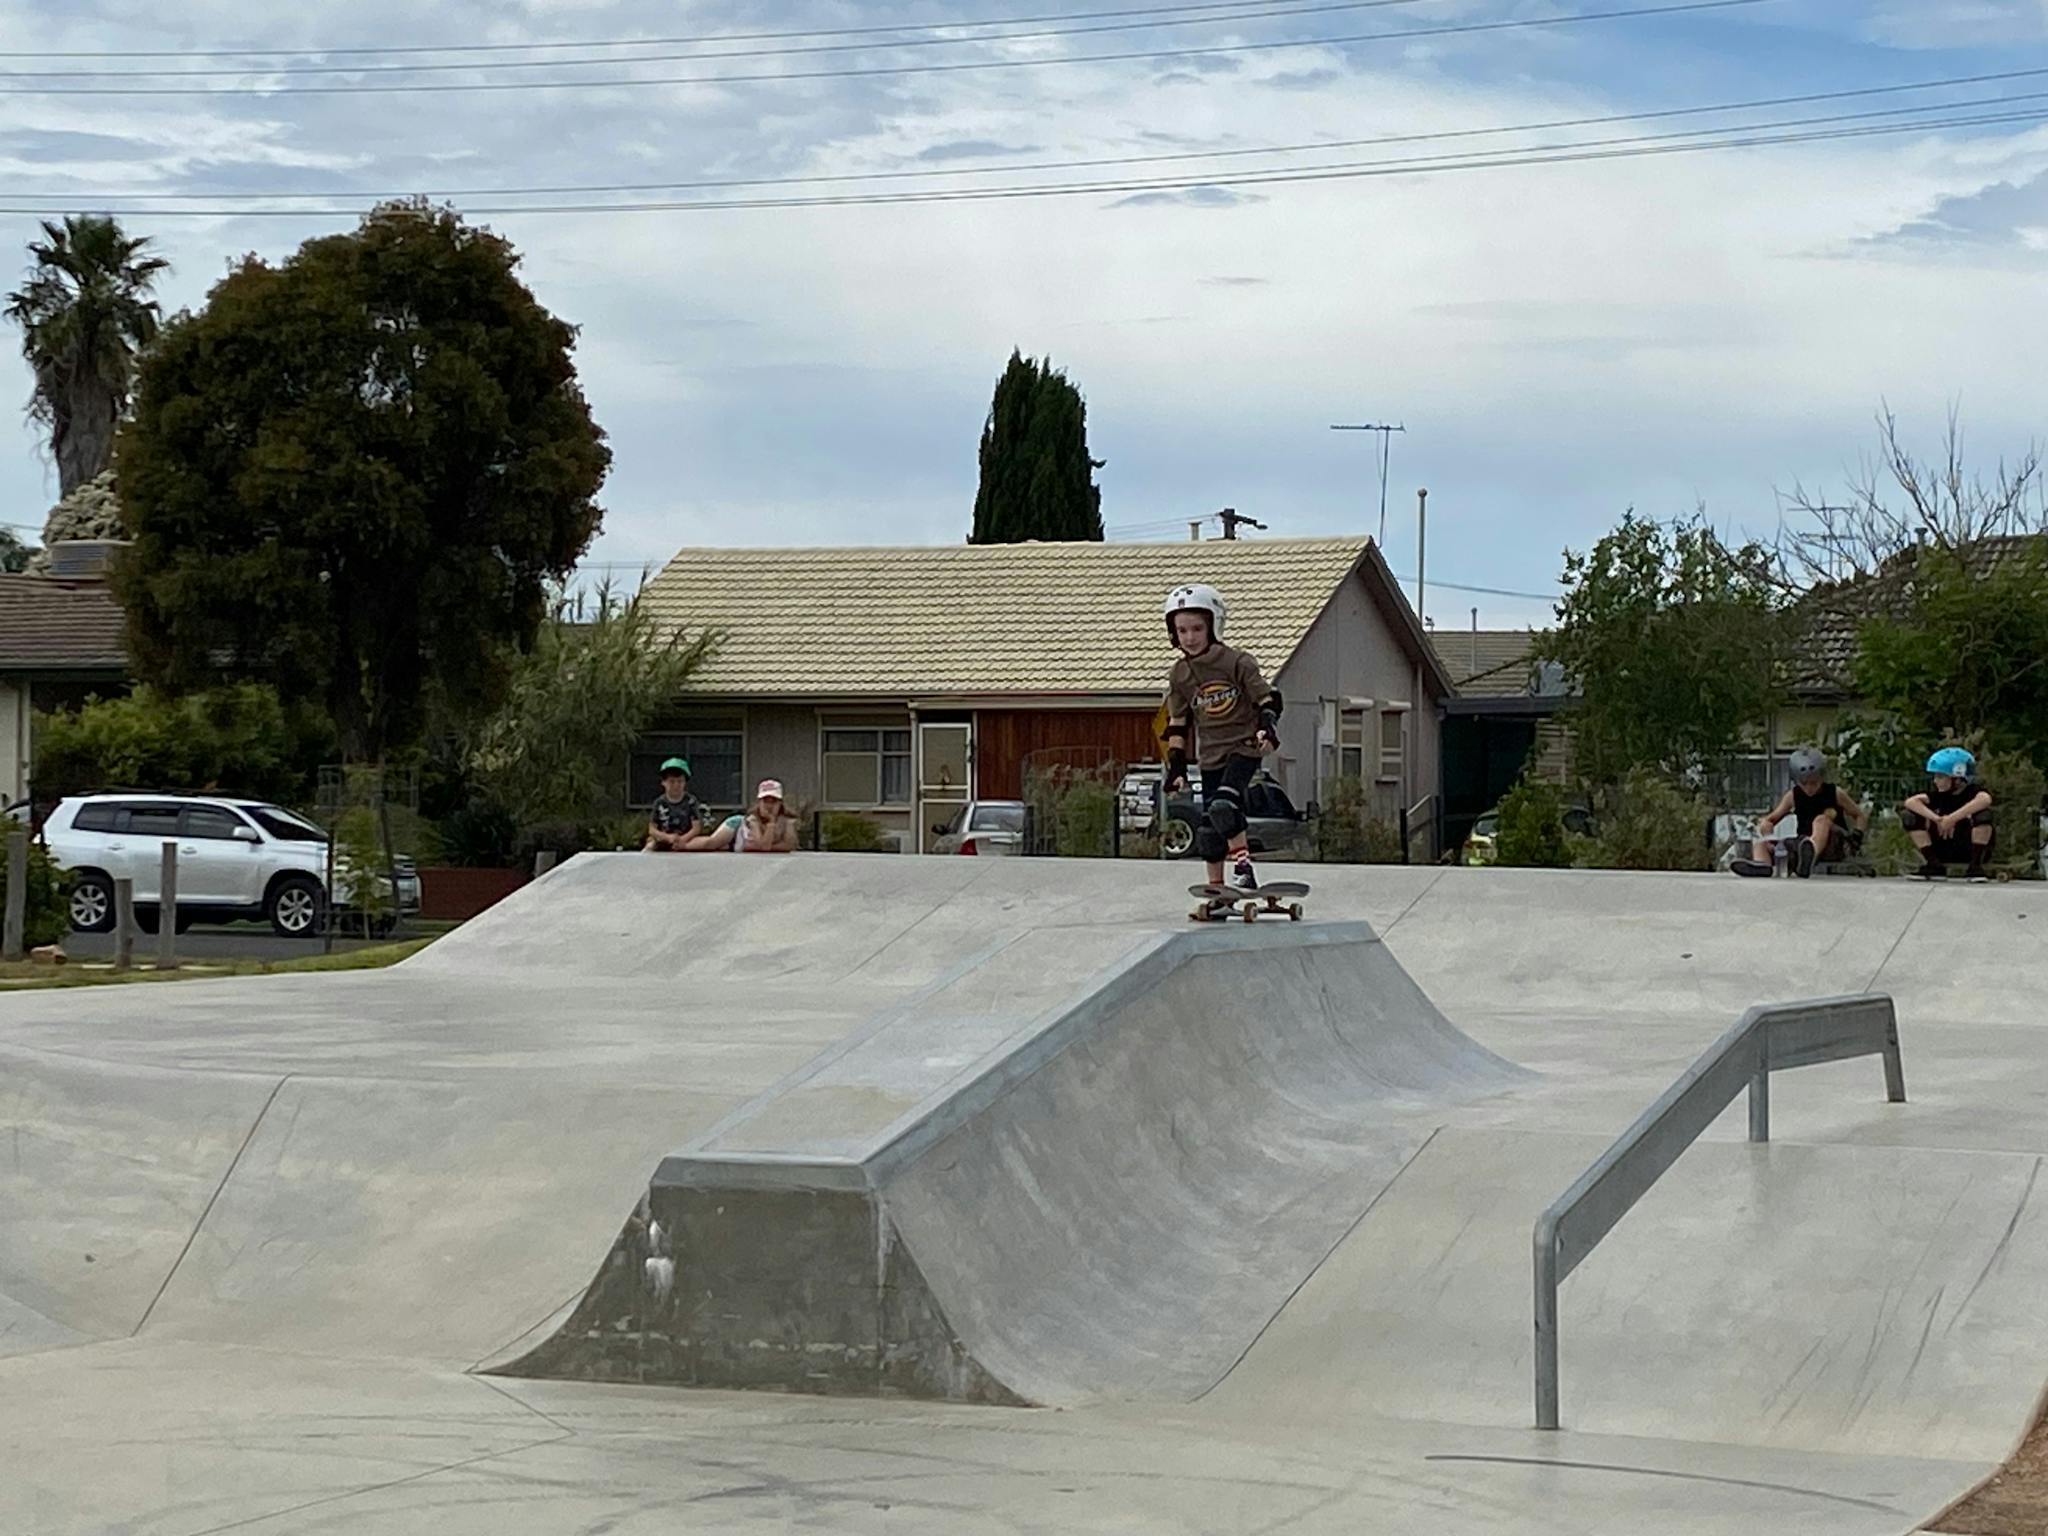 Child using Skateboard on Cement Skate park with other children watching on